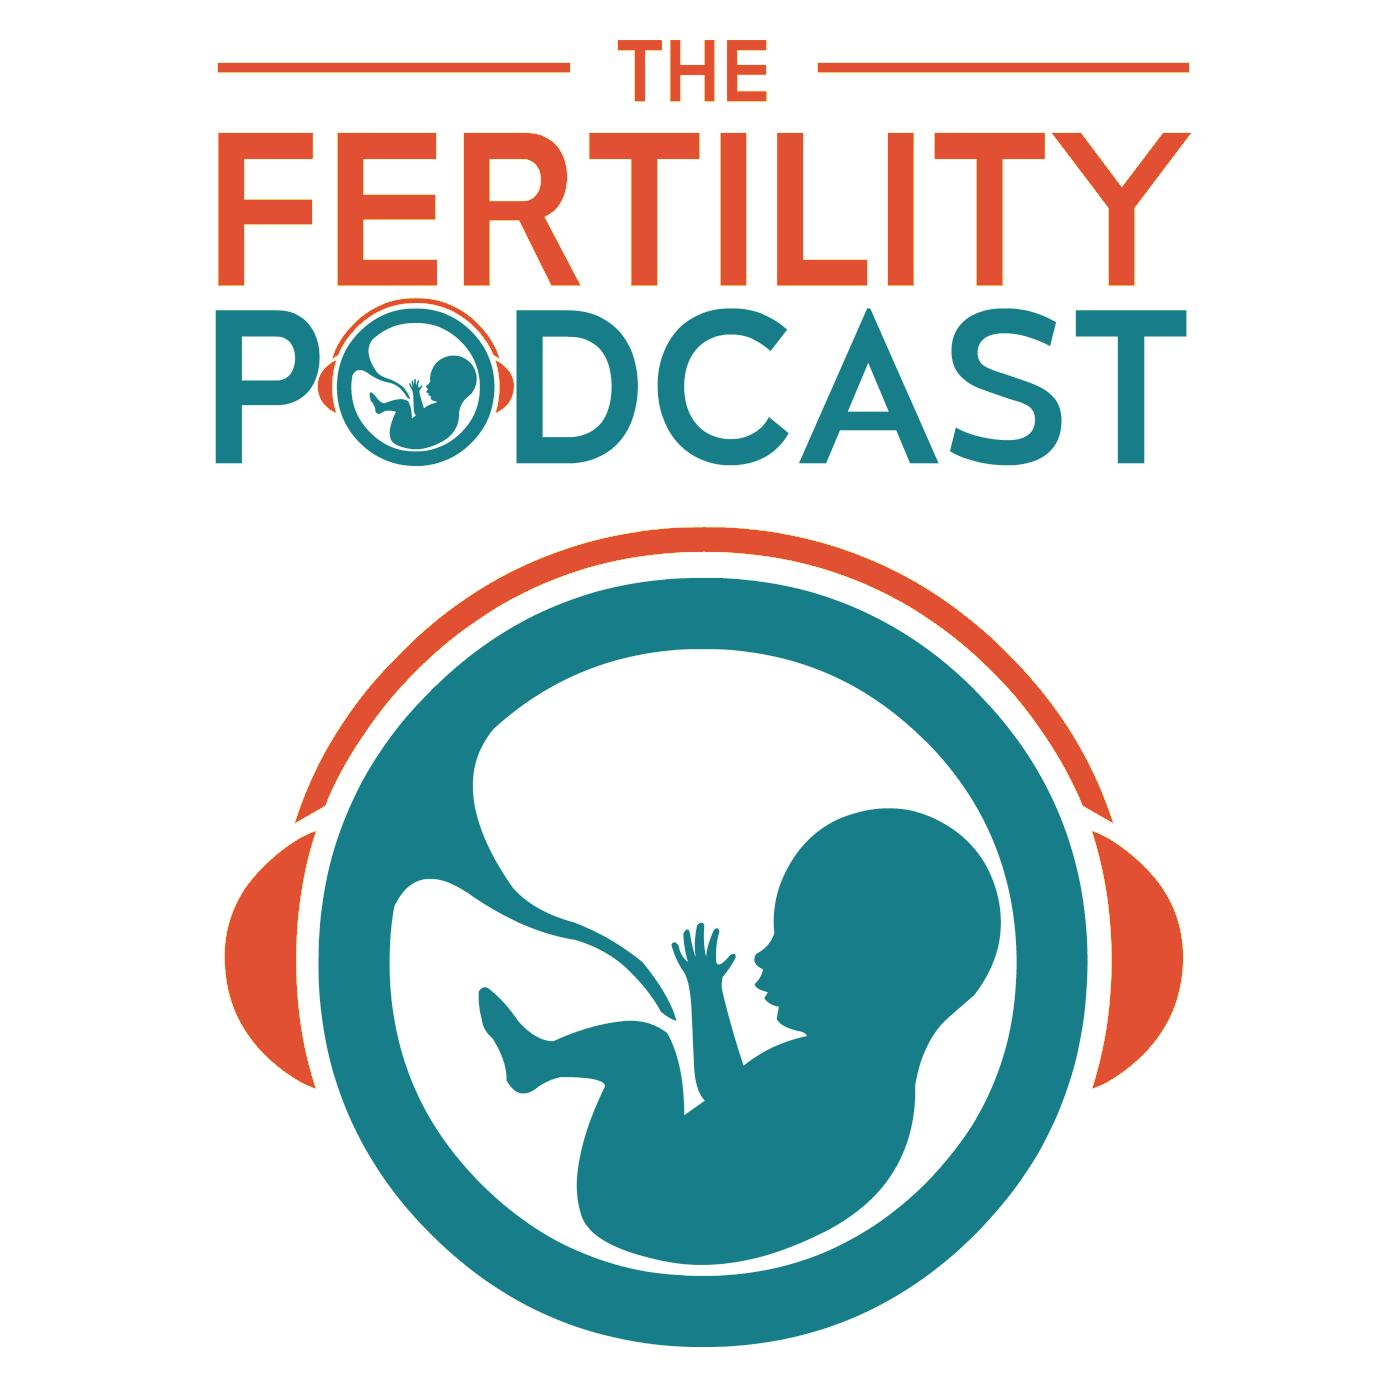 Why I blogged about my male infertility?